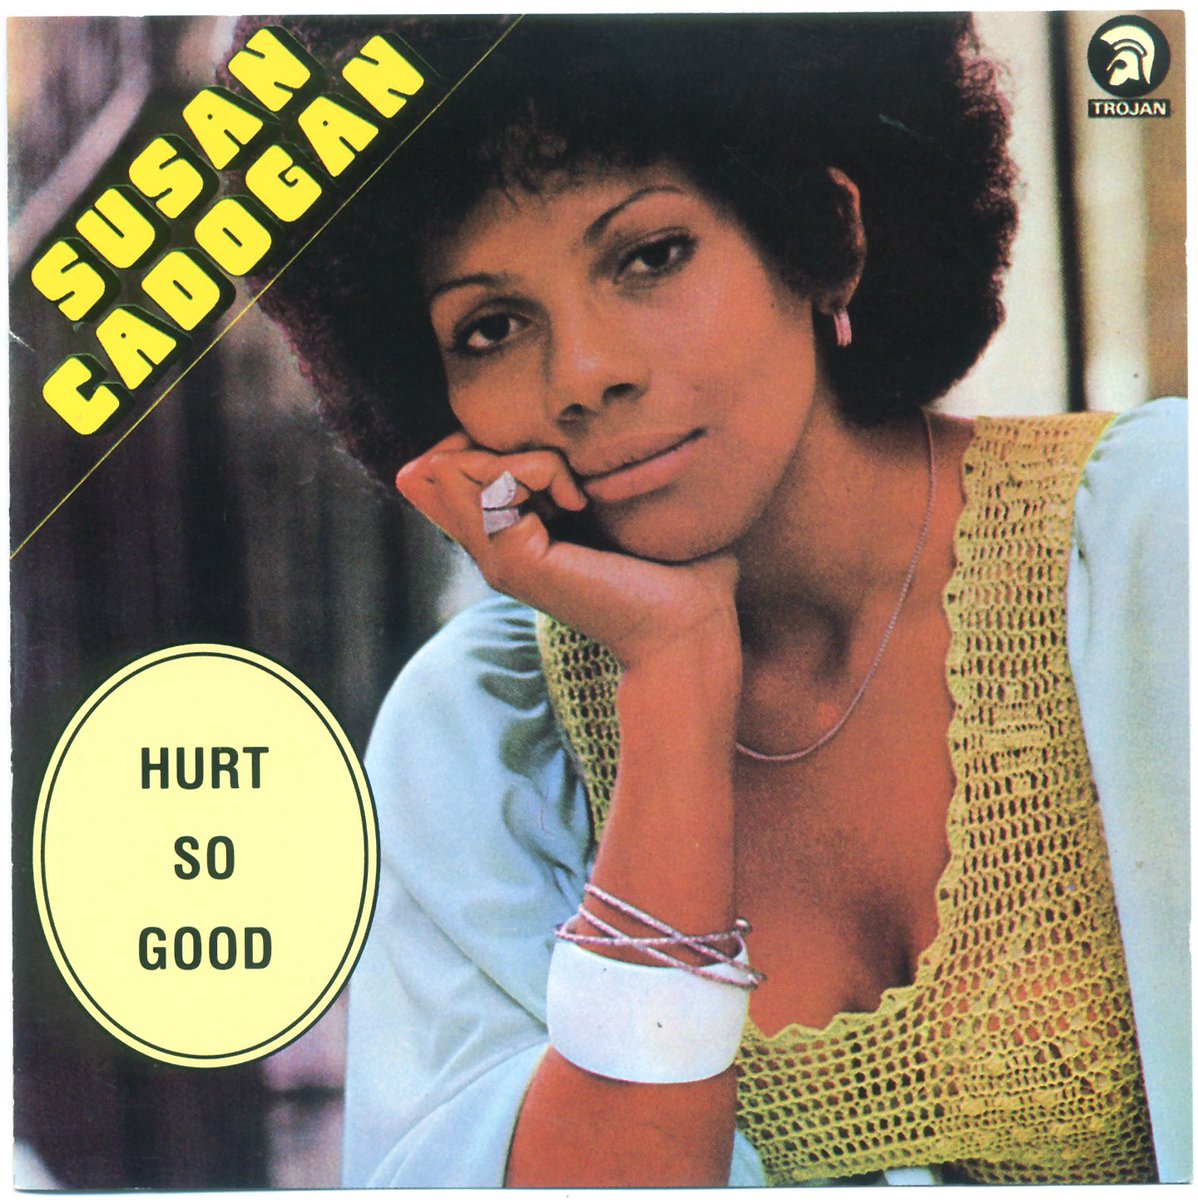 ‘Hurt So Good’ had previously provided noted r&b singer Millie Jackson with a major US chart hit, but Allison ‘Susan’ Cadogan’s more restrained rendition, produced by Lee ‘Scratch’ Perry at his famed Black Ark studio in Kingston, Jamaica, her version reaching number 4 in May 1975